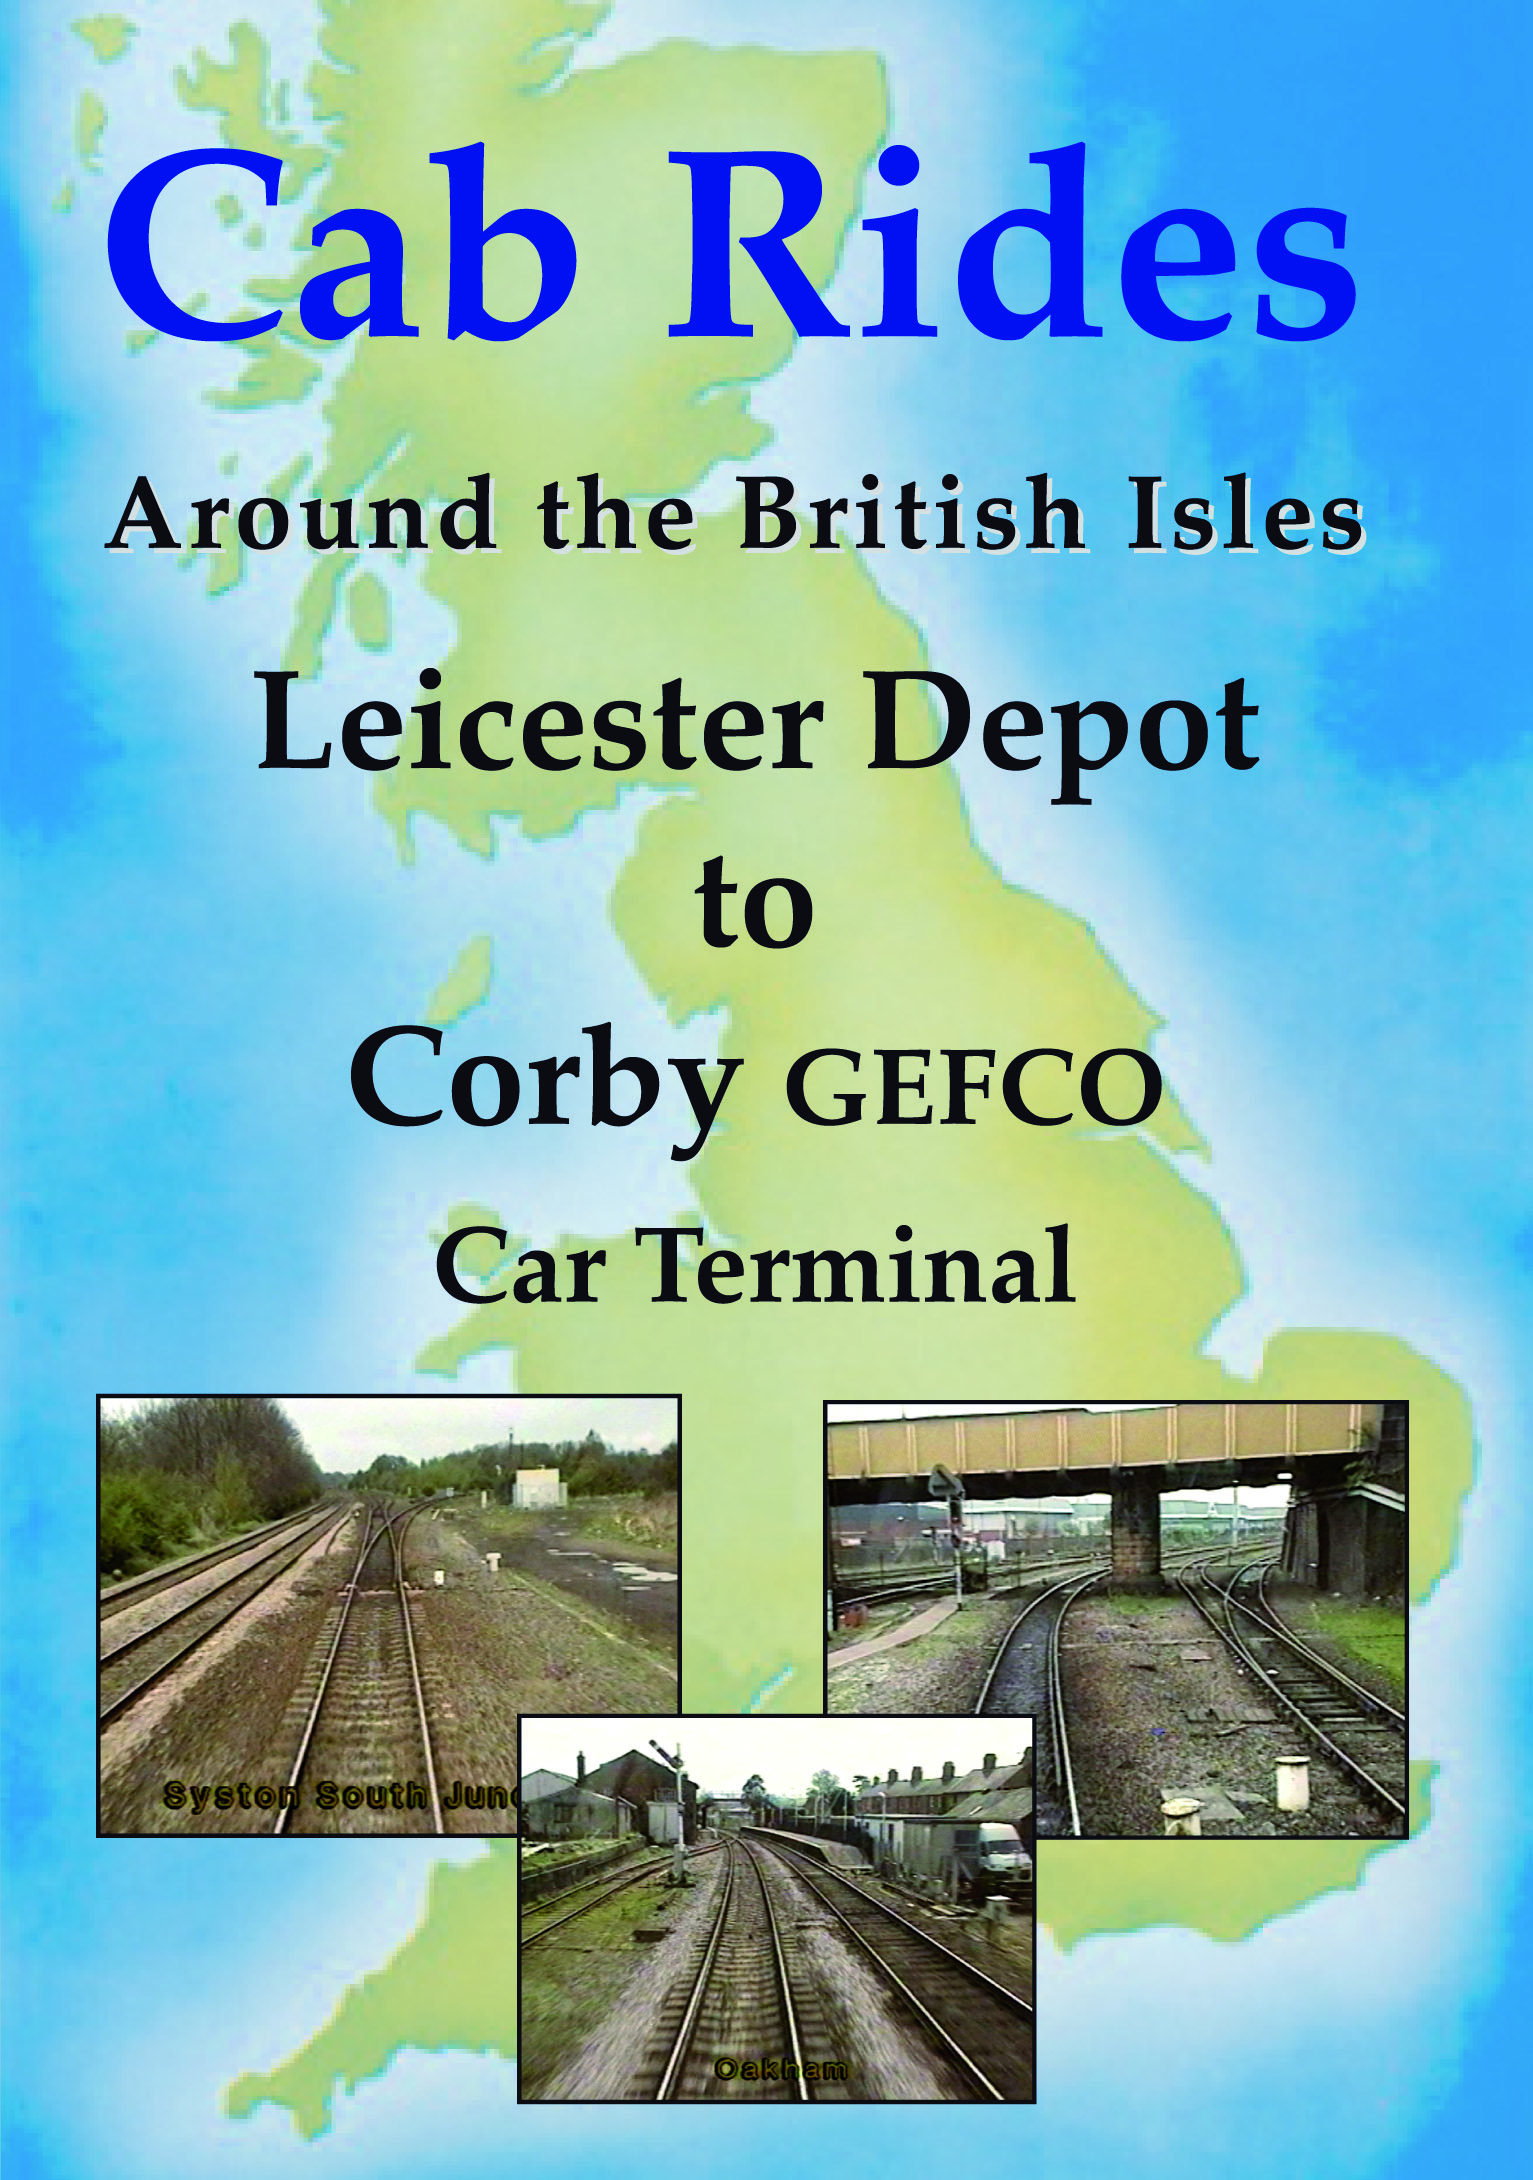 Cab Rides Around the British Isles: Leicester Depot to Corby GEFCO Car Terminal